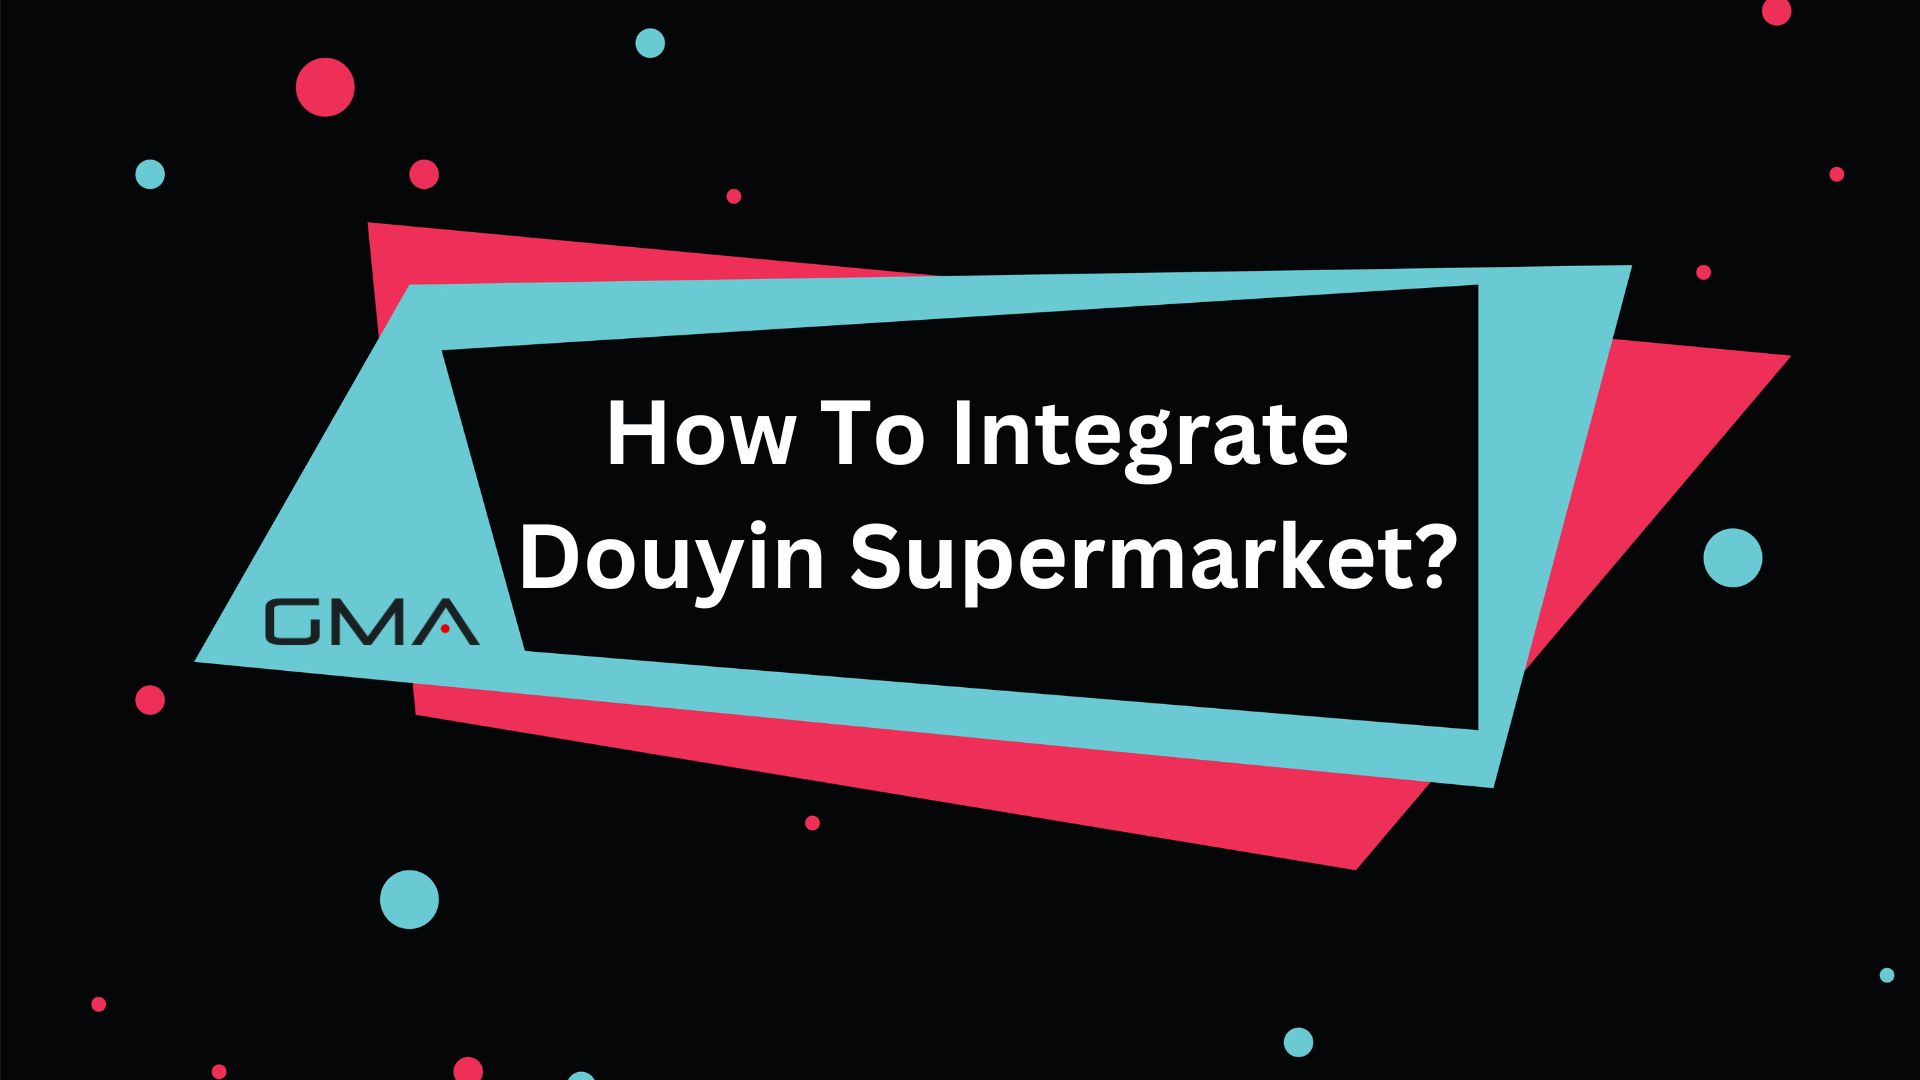 How To Integrate Douyin Supermarket?